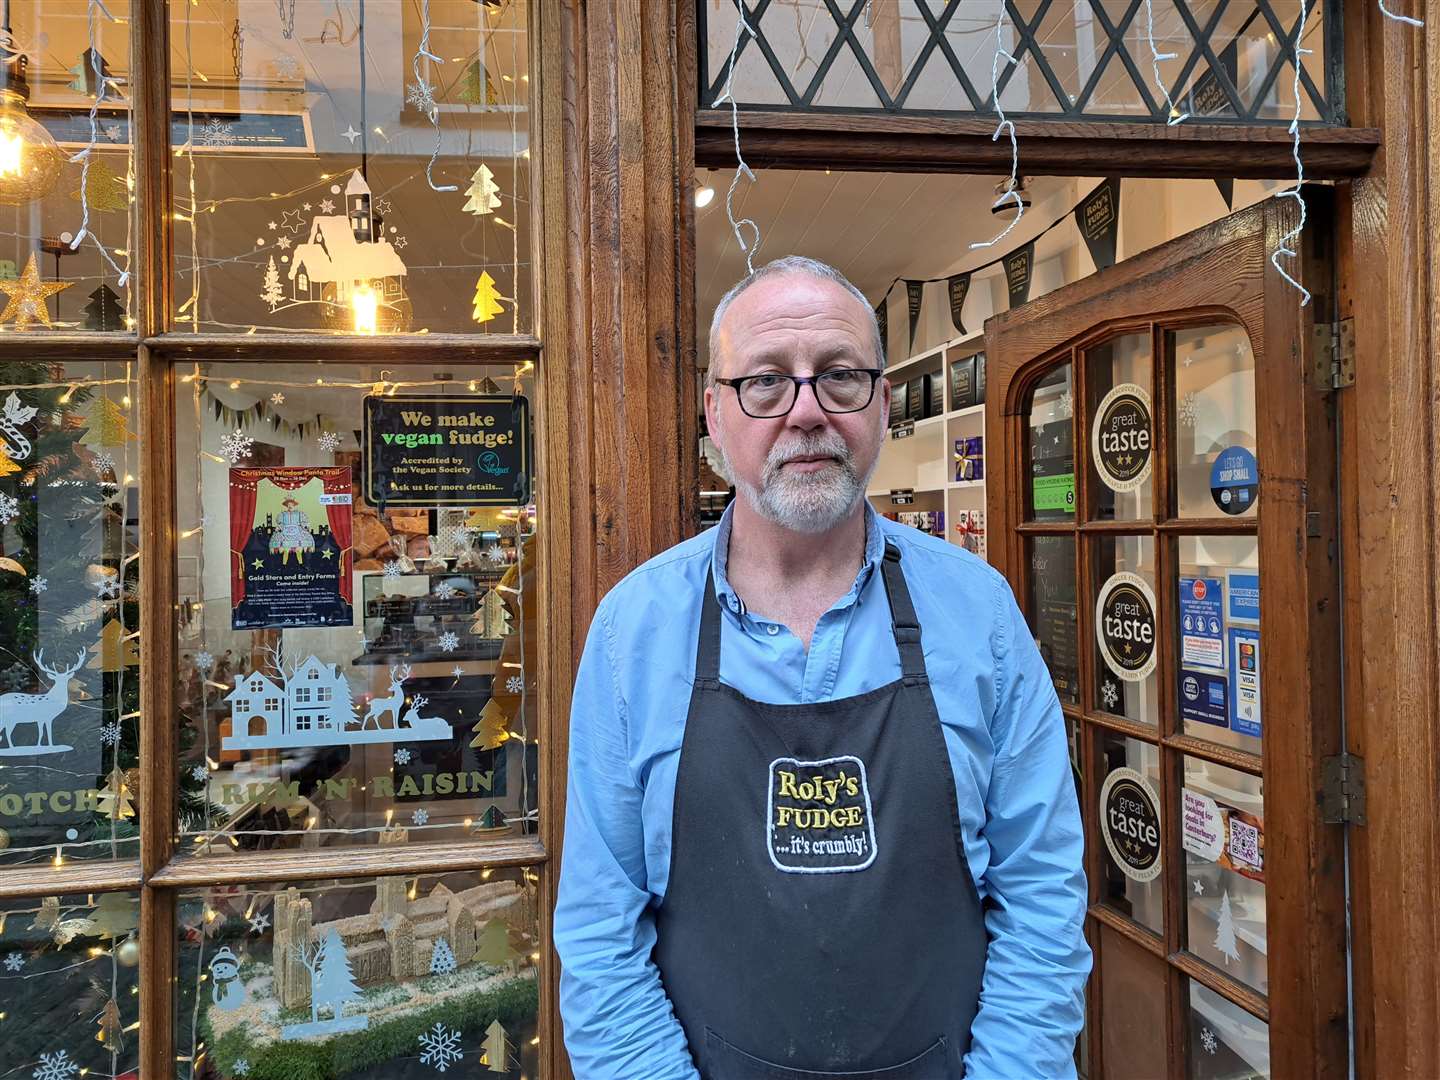 Steve Hamblen of Roly's Fudge Pantry Canterbury was shocked to find broken glass when he arrived to open his shop